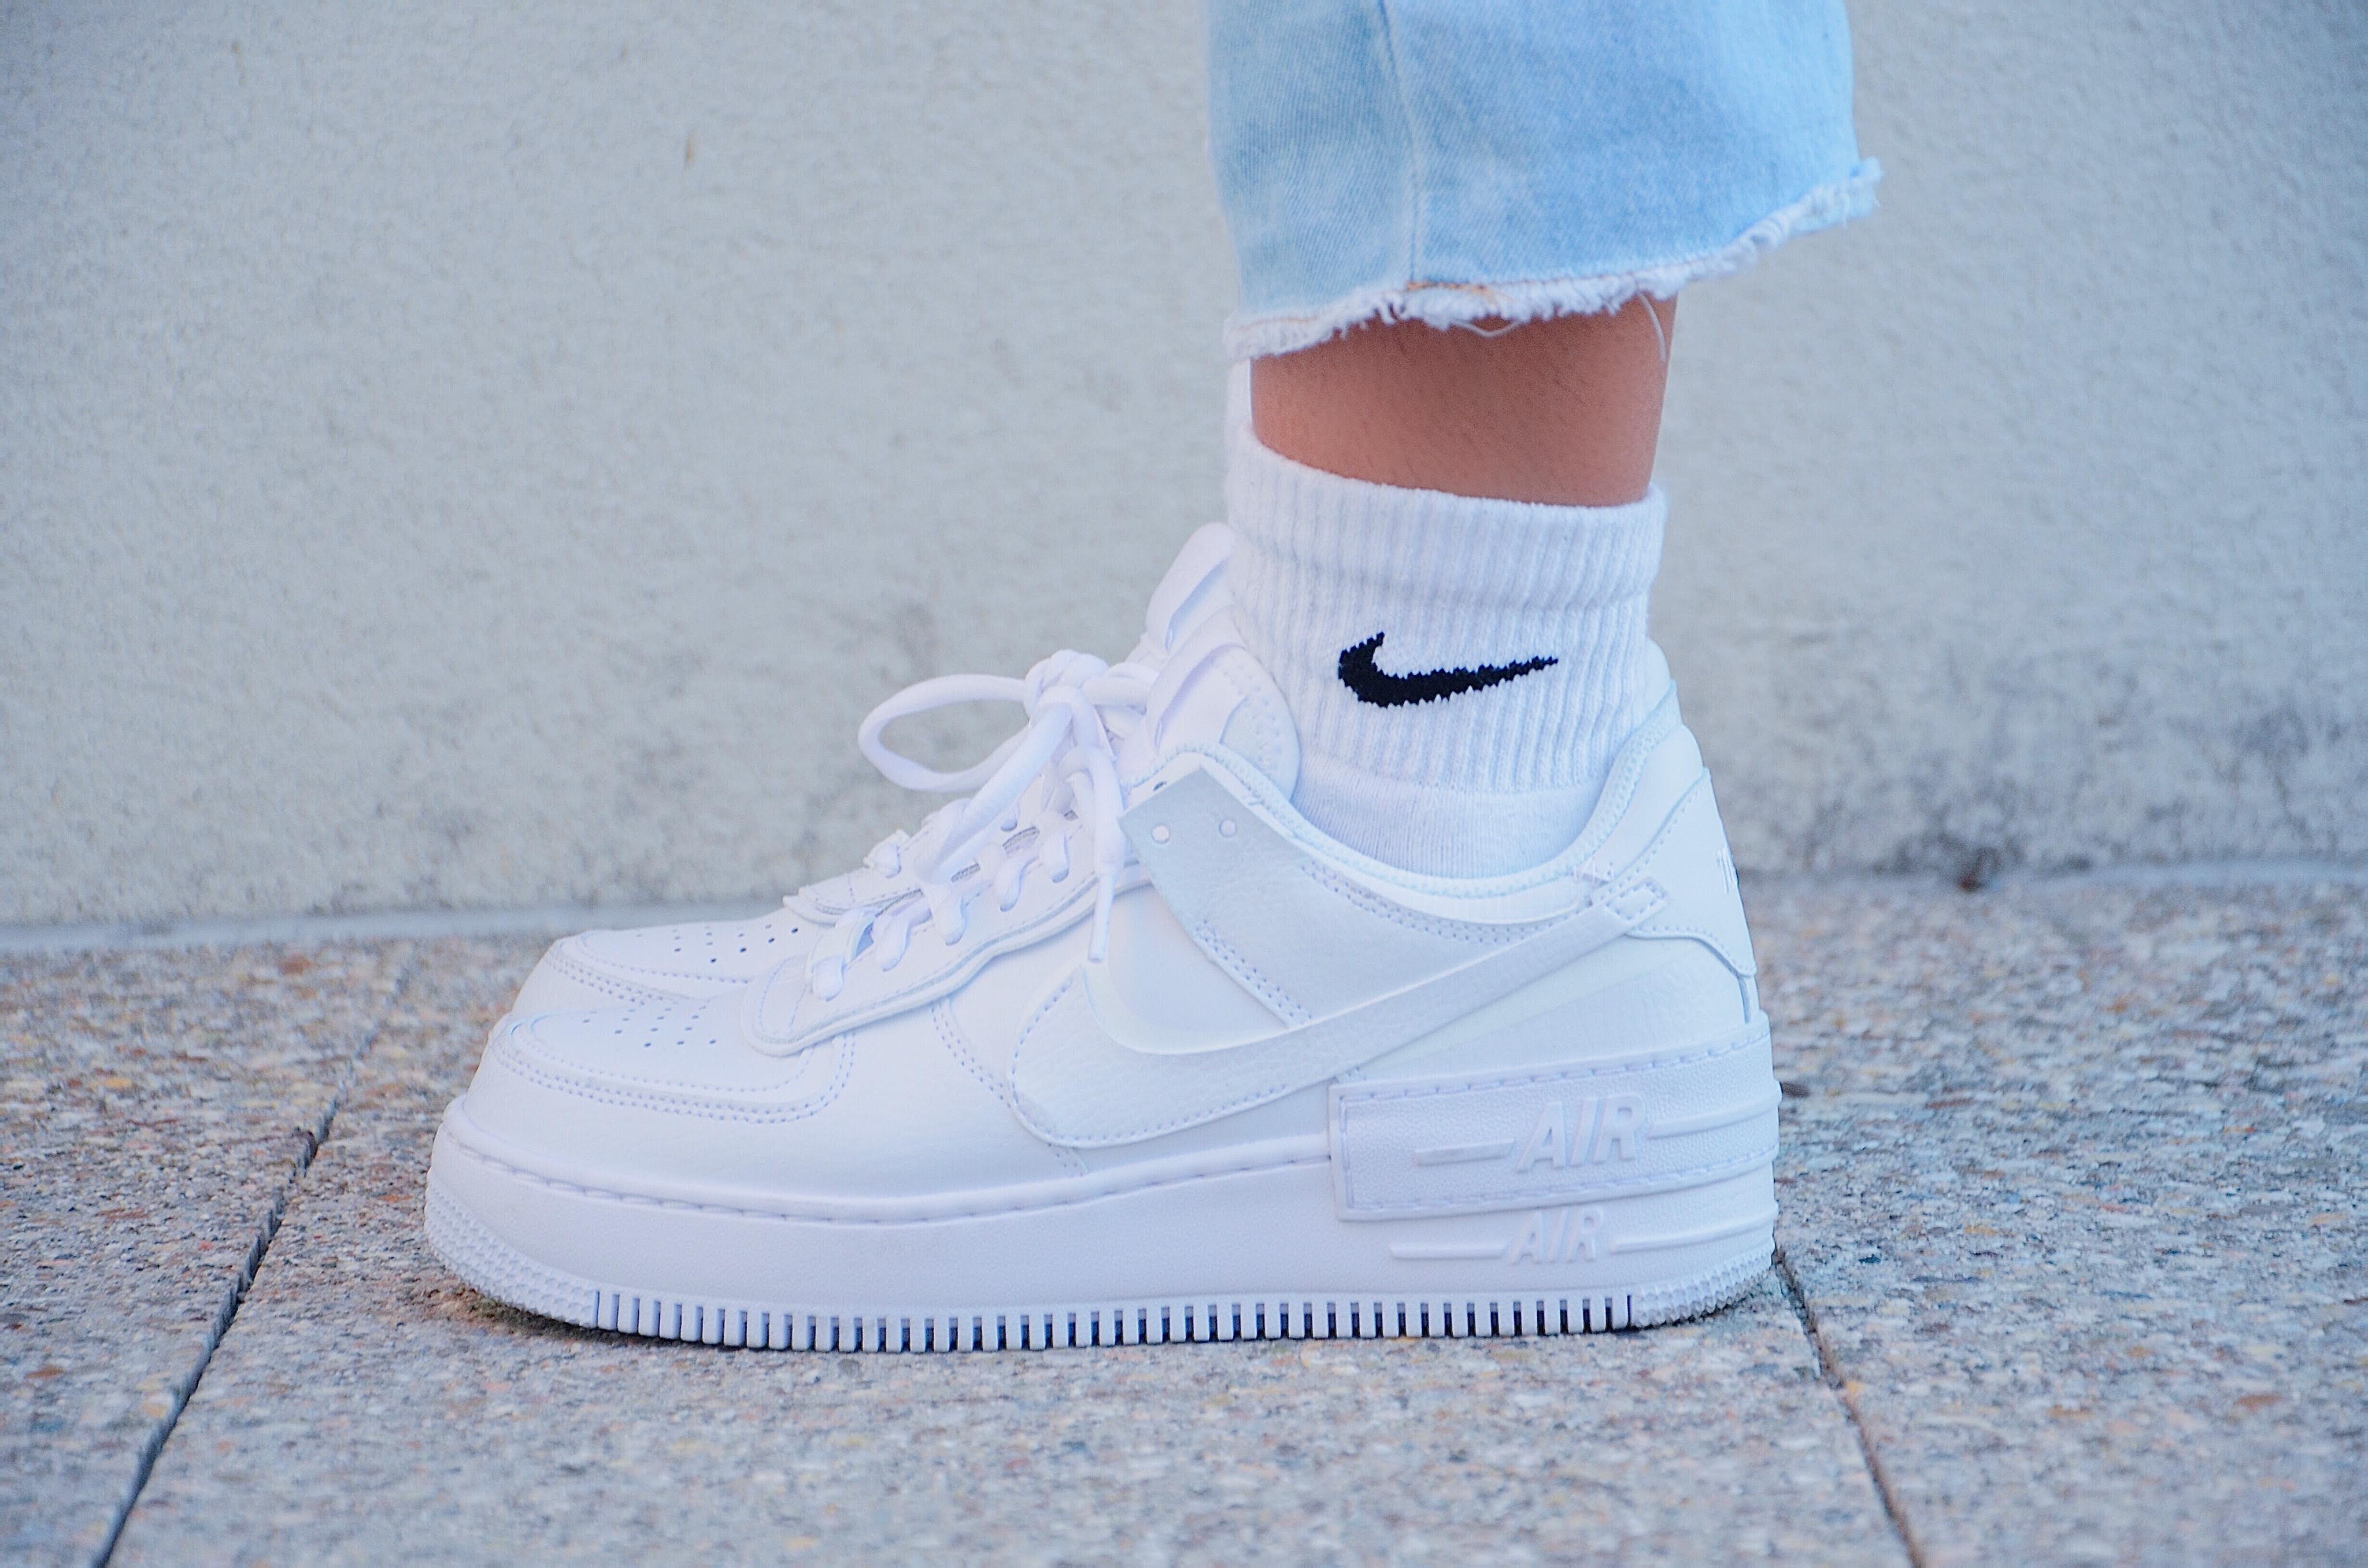 shoes similar to air force ones